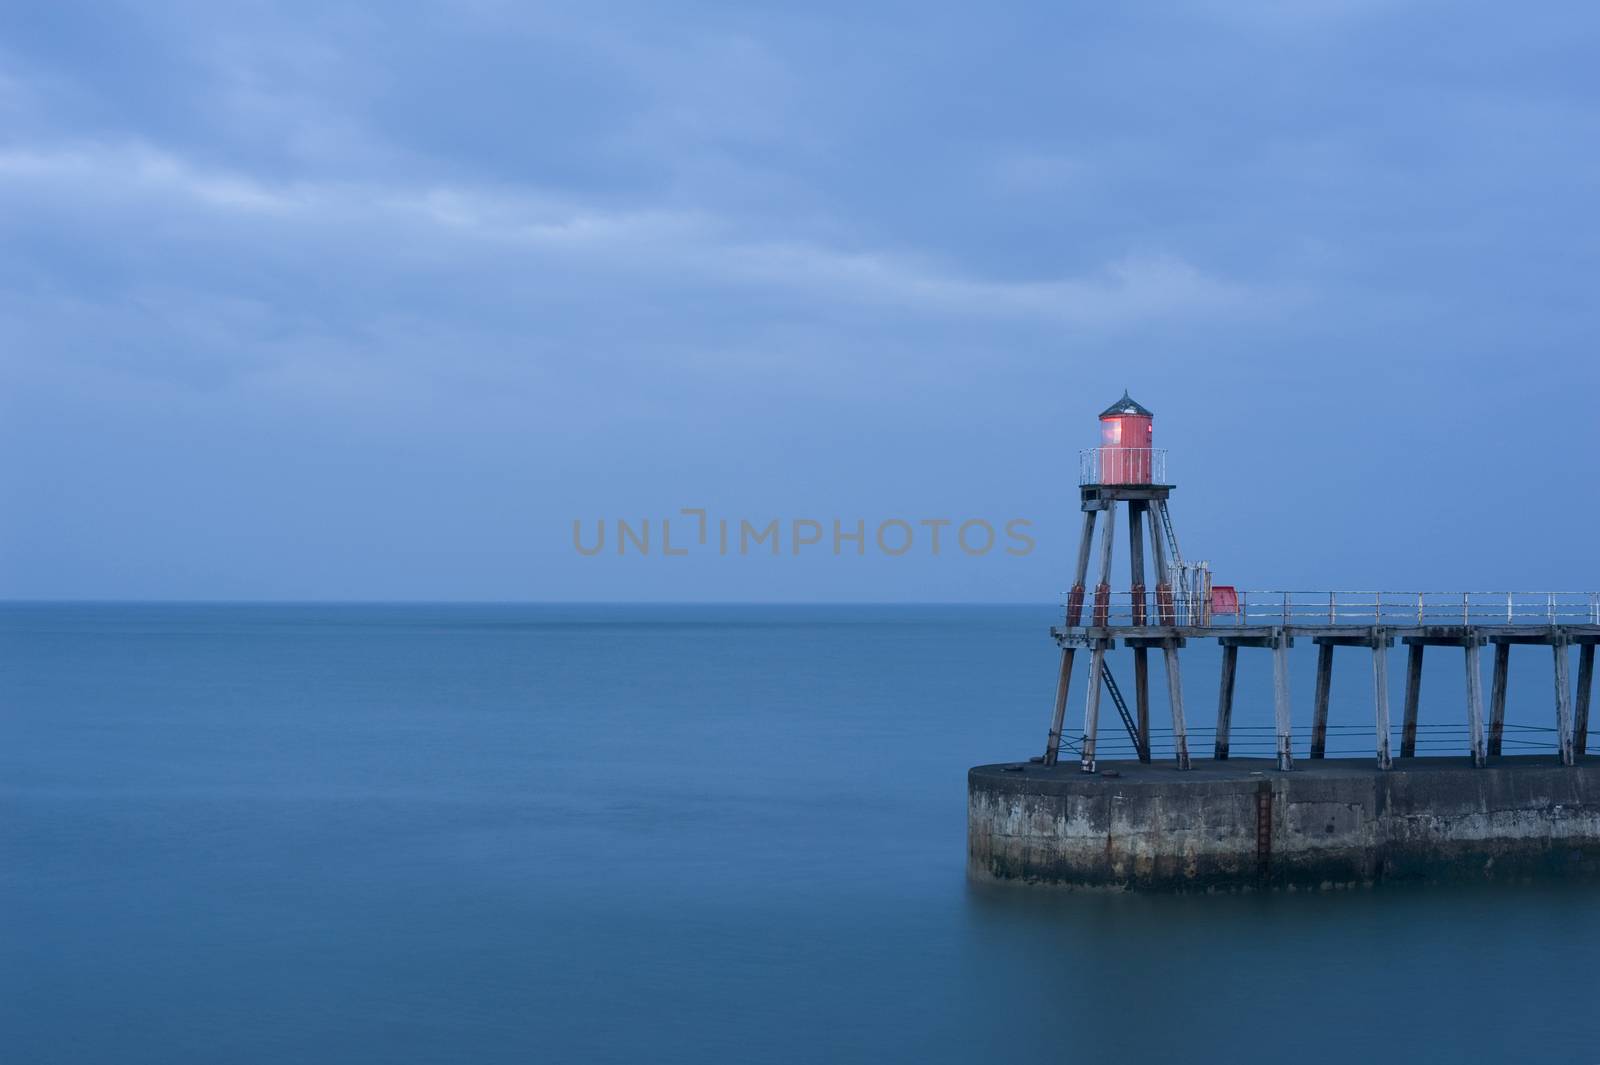 Whitby pier with one of the navigation beacons to guide shipping into the harbour at night on a calm ocean with copyspace